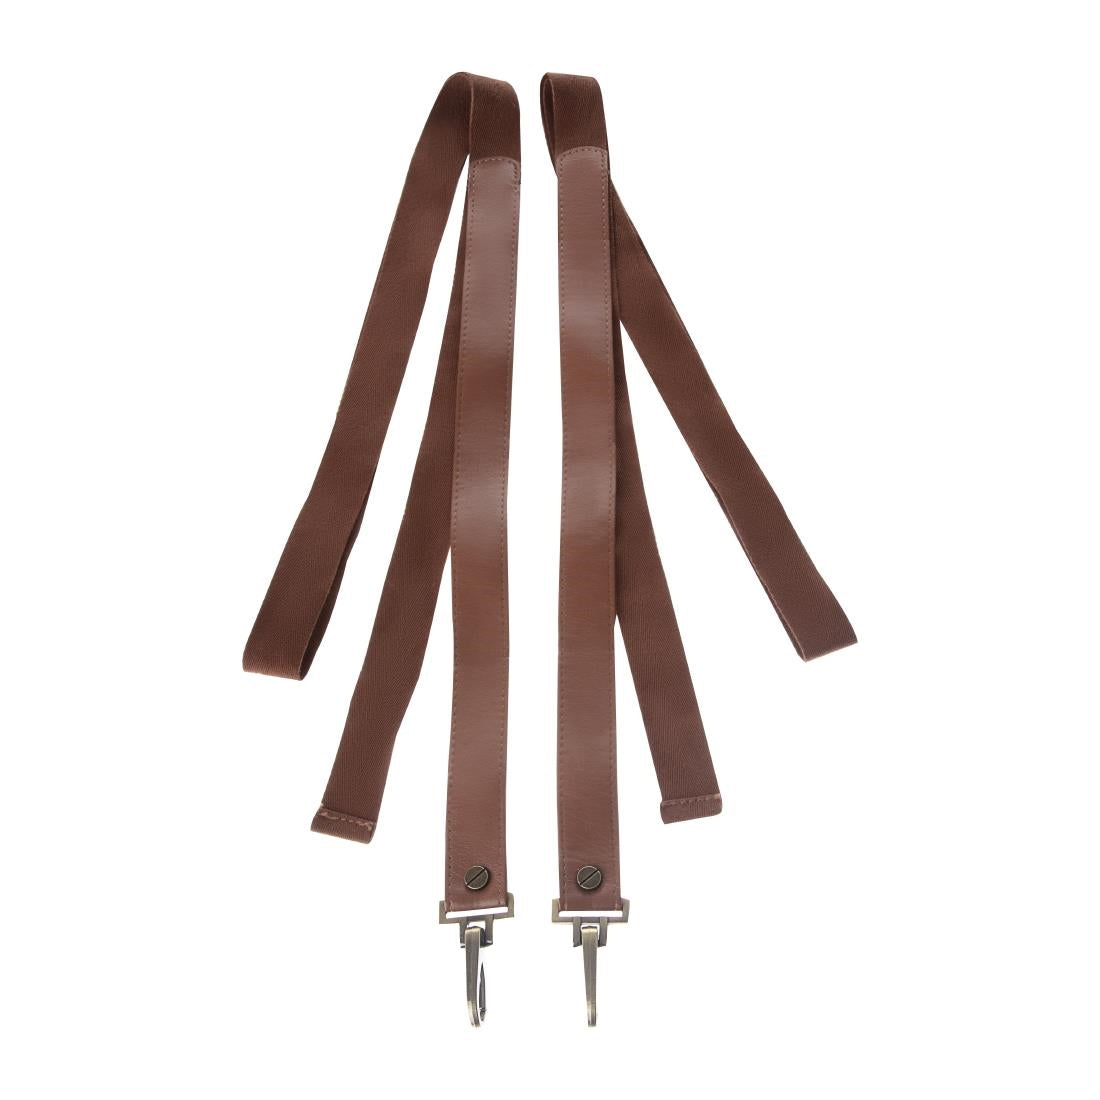 FT607 Southside Apron Spare Doghook PU strap Tan (2 pack) JD Catering Equipment Solutions Ltd